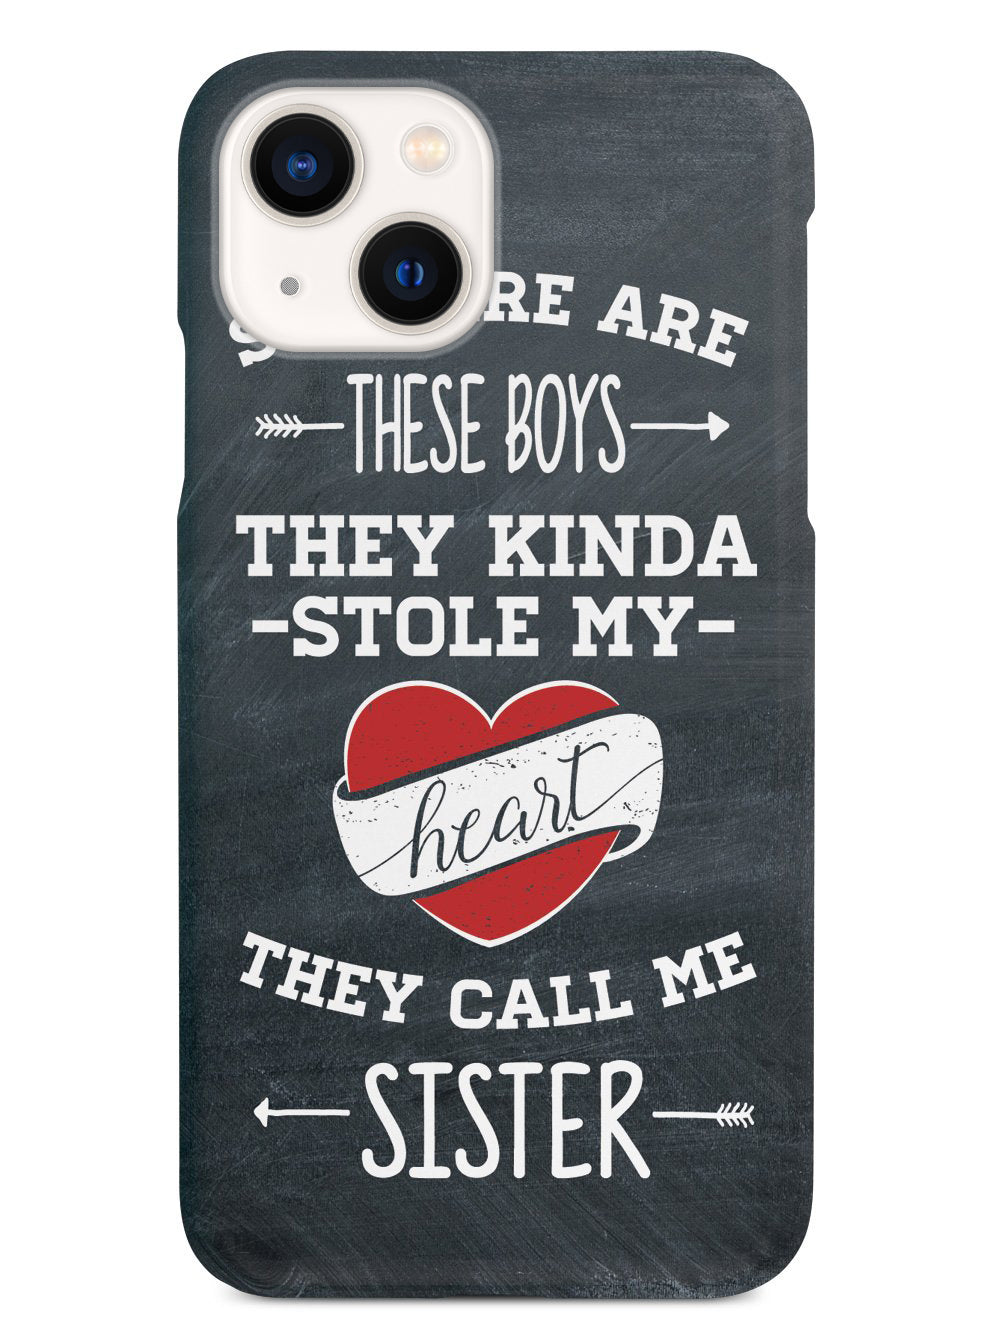 So There Are These Boys - Sister Case